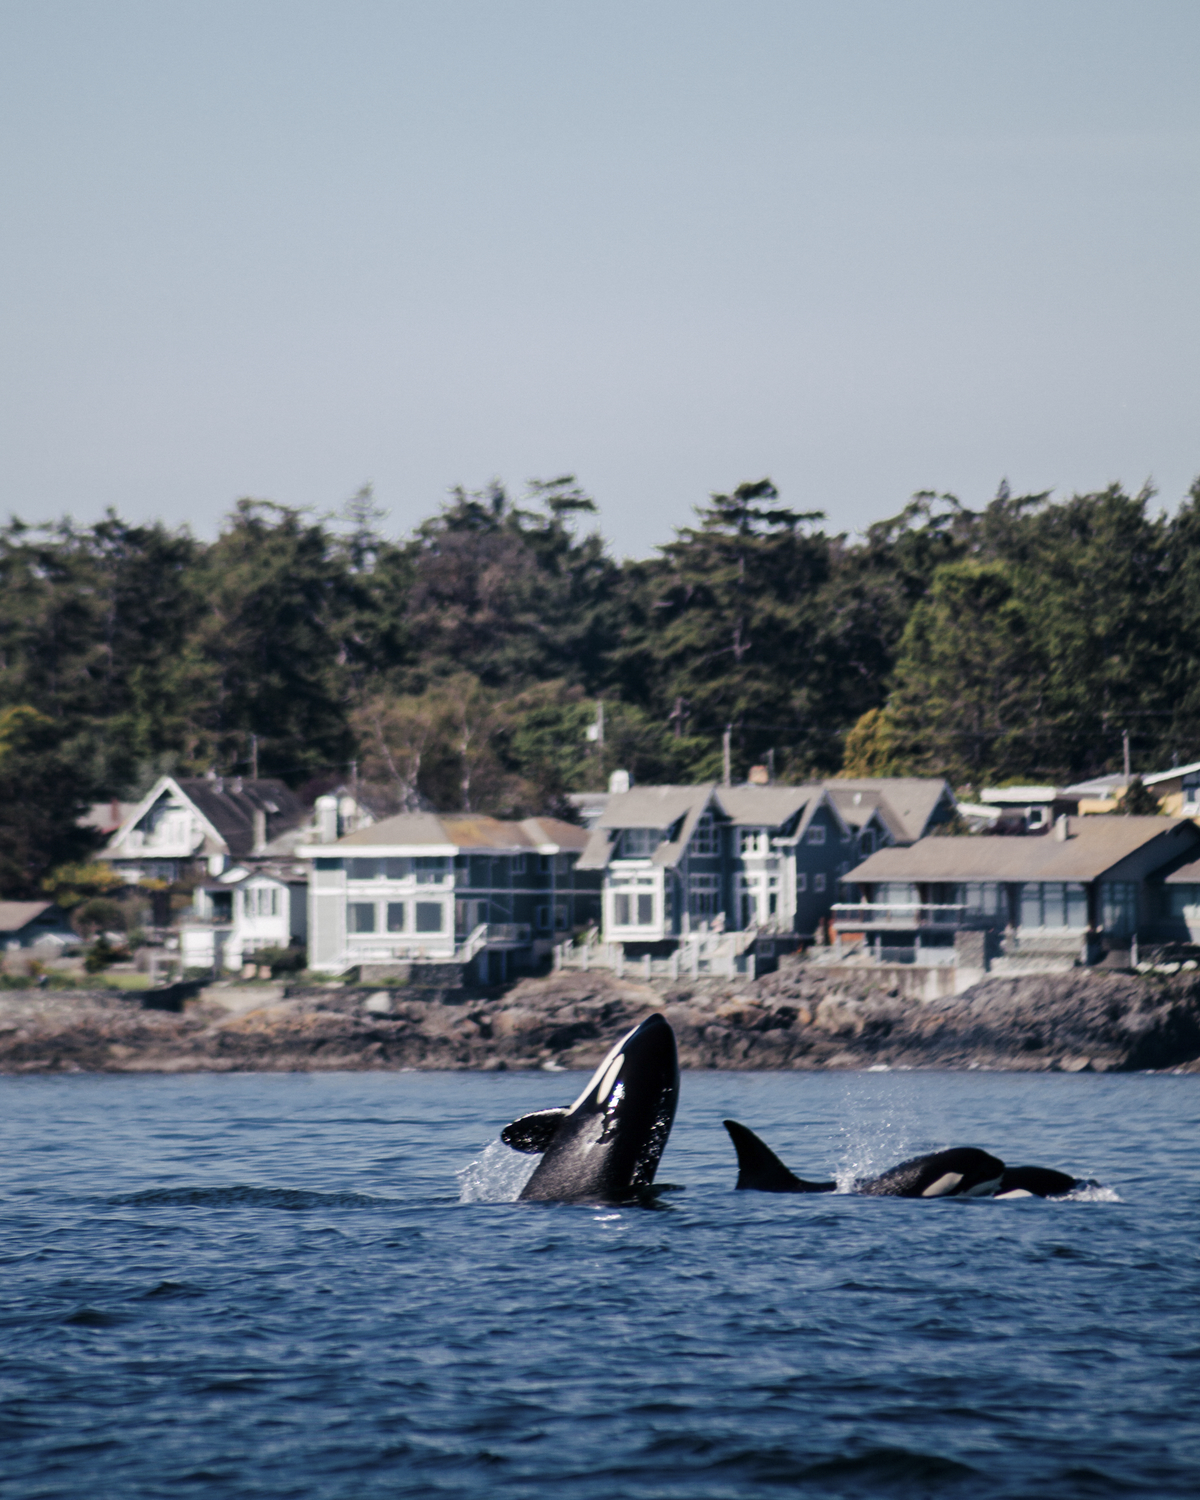 A pod of orca whales in the water with homes in the distance on the shoreline